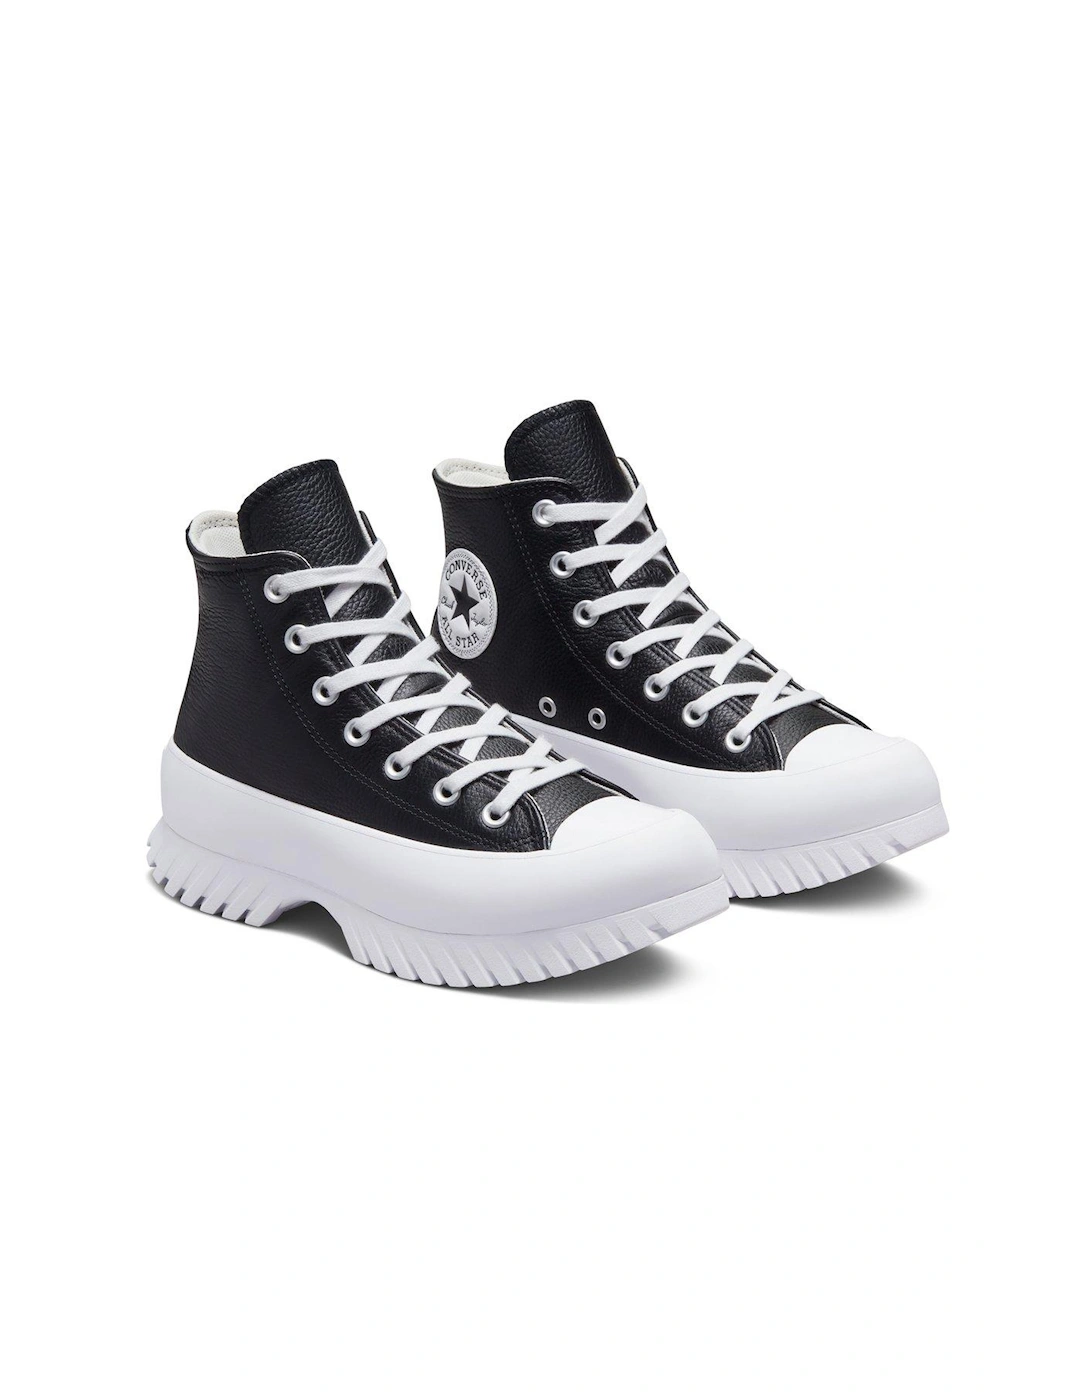 Chuck Taylor All Star Lugged Leather Hi-Tops - Black/White